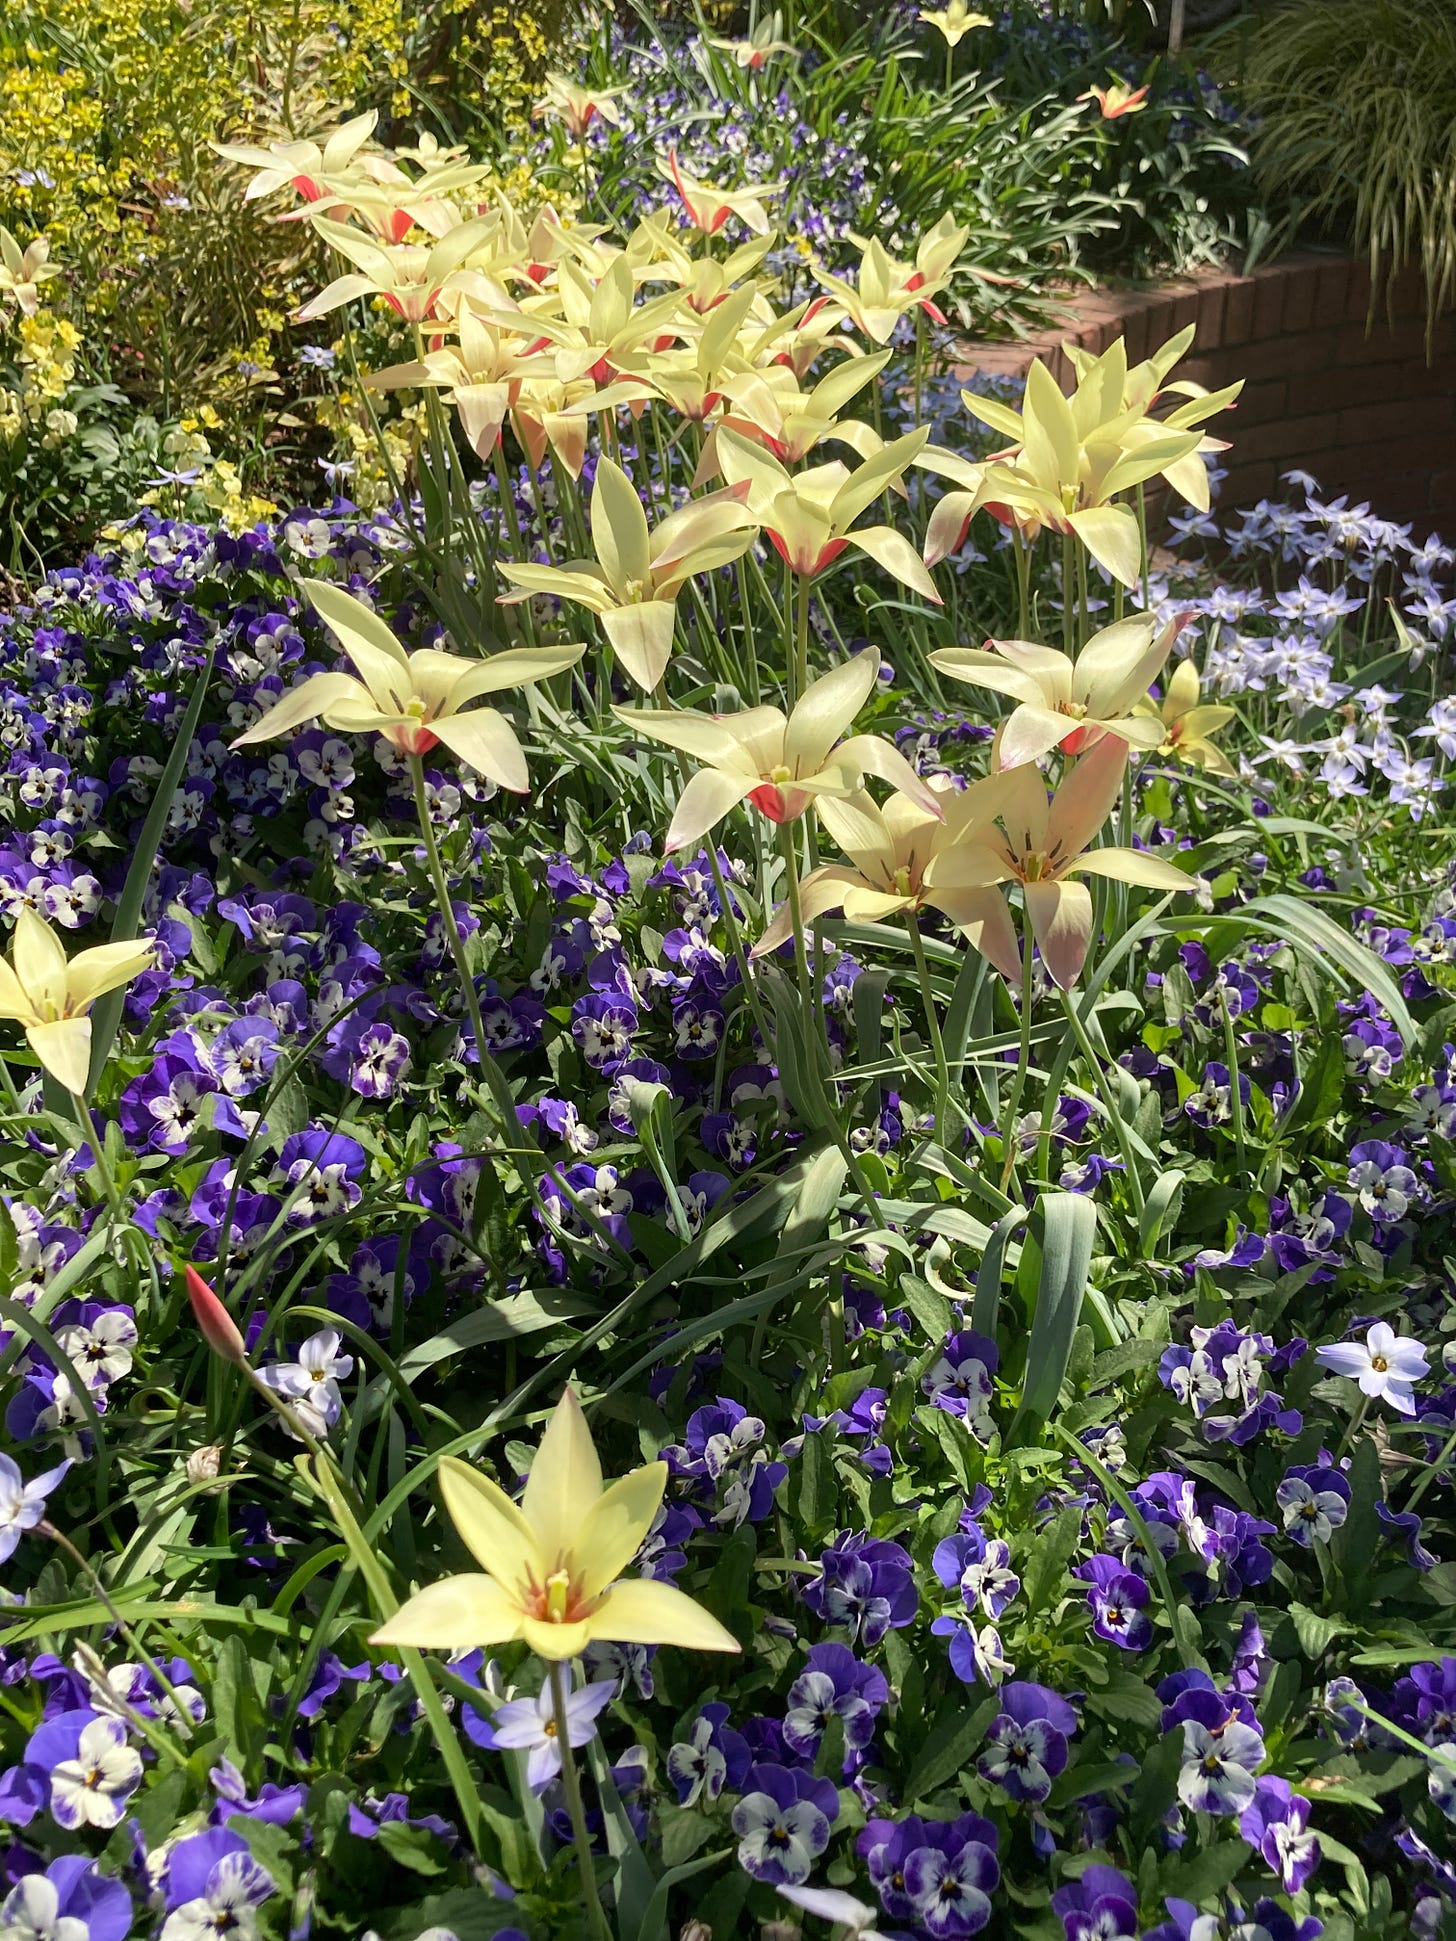 An assortment of blue-white pansies, tall yellow lilies, and other flowers and greener